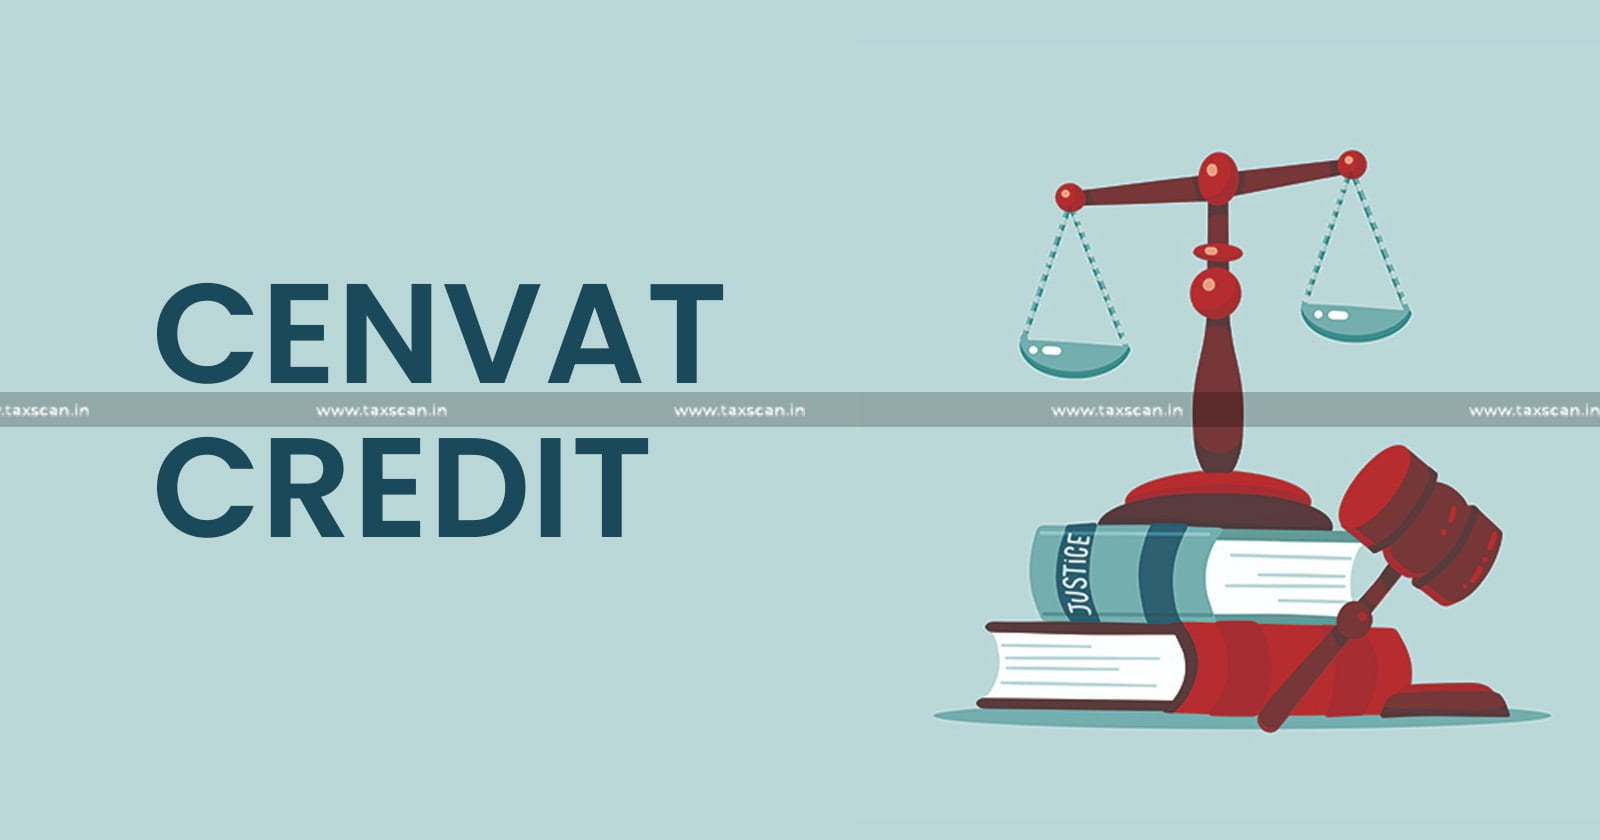 CESTAT allows Cenvat Credit on Invoices issued by Unregistered Dealer - Actual Receipt of Goods not Disputed - TAXSCAN